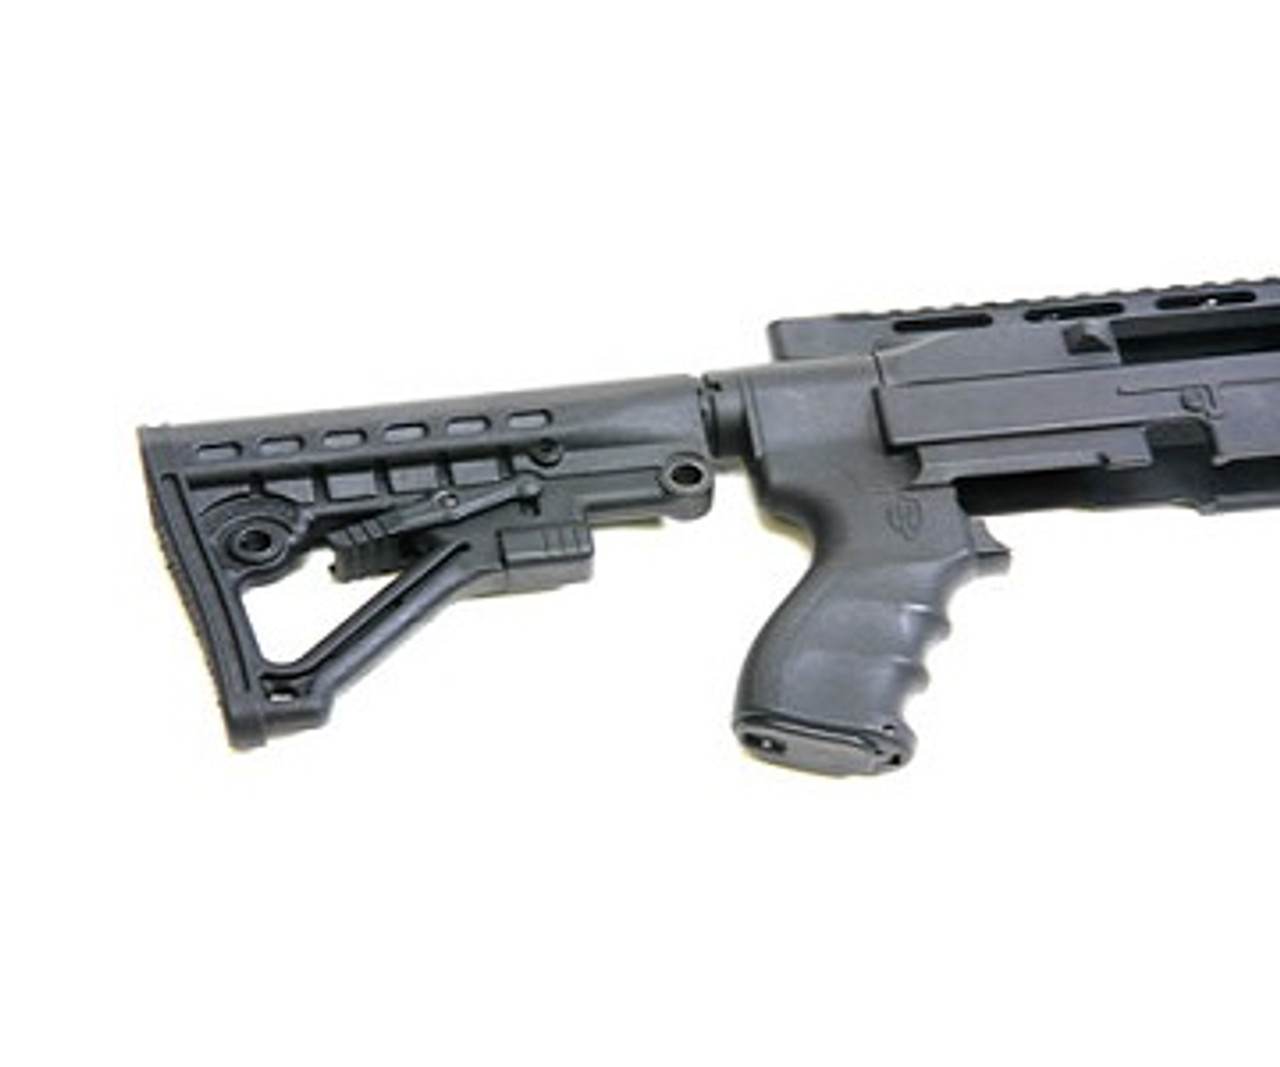 Archangel® 556 AR-15® Style Conversion Stock for the Ruger® 10/22® - Black Polymer